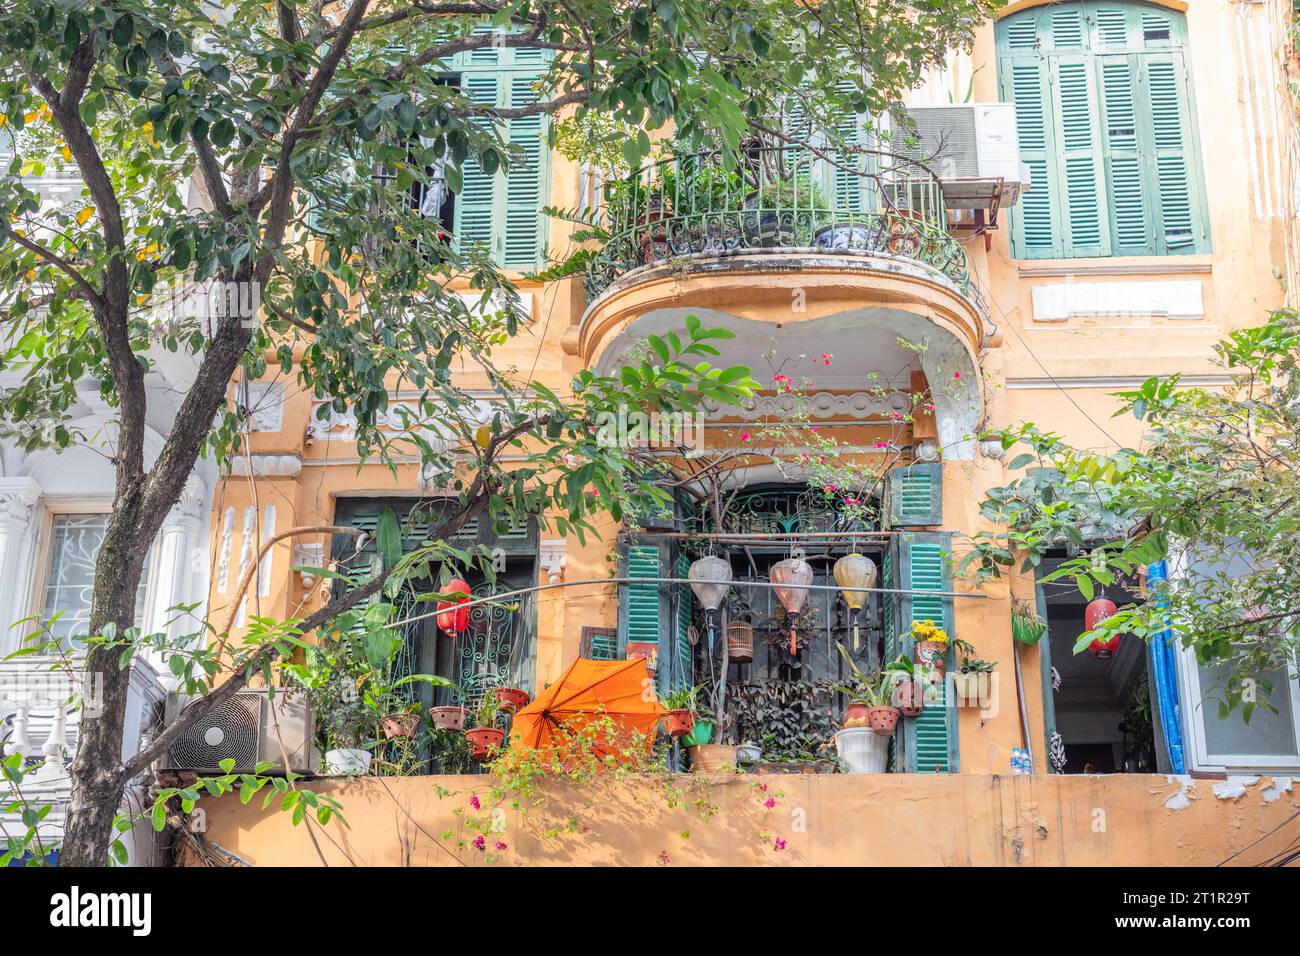 French Indochina architecture of Old Quarter or Phố cổ Hà Nội, Hanoi, Vietnam. Stock Photo